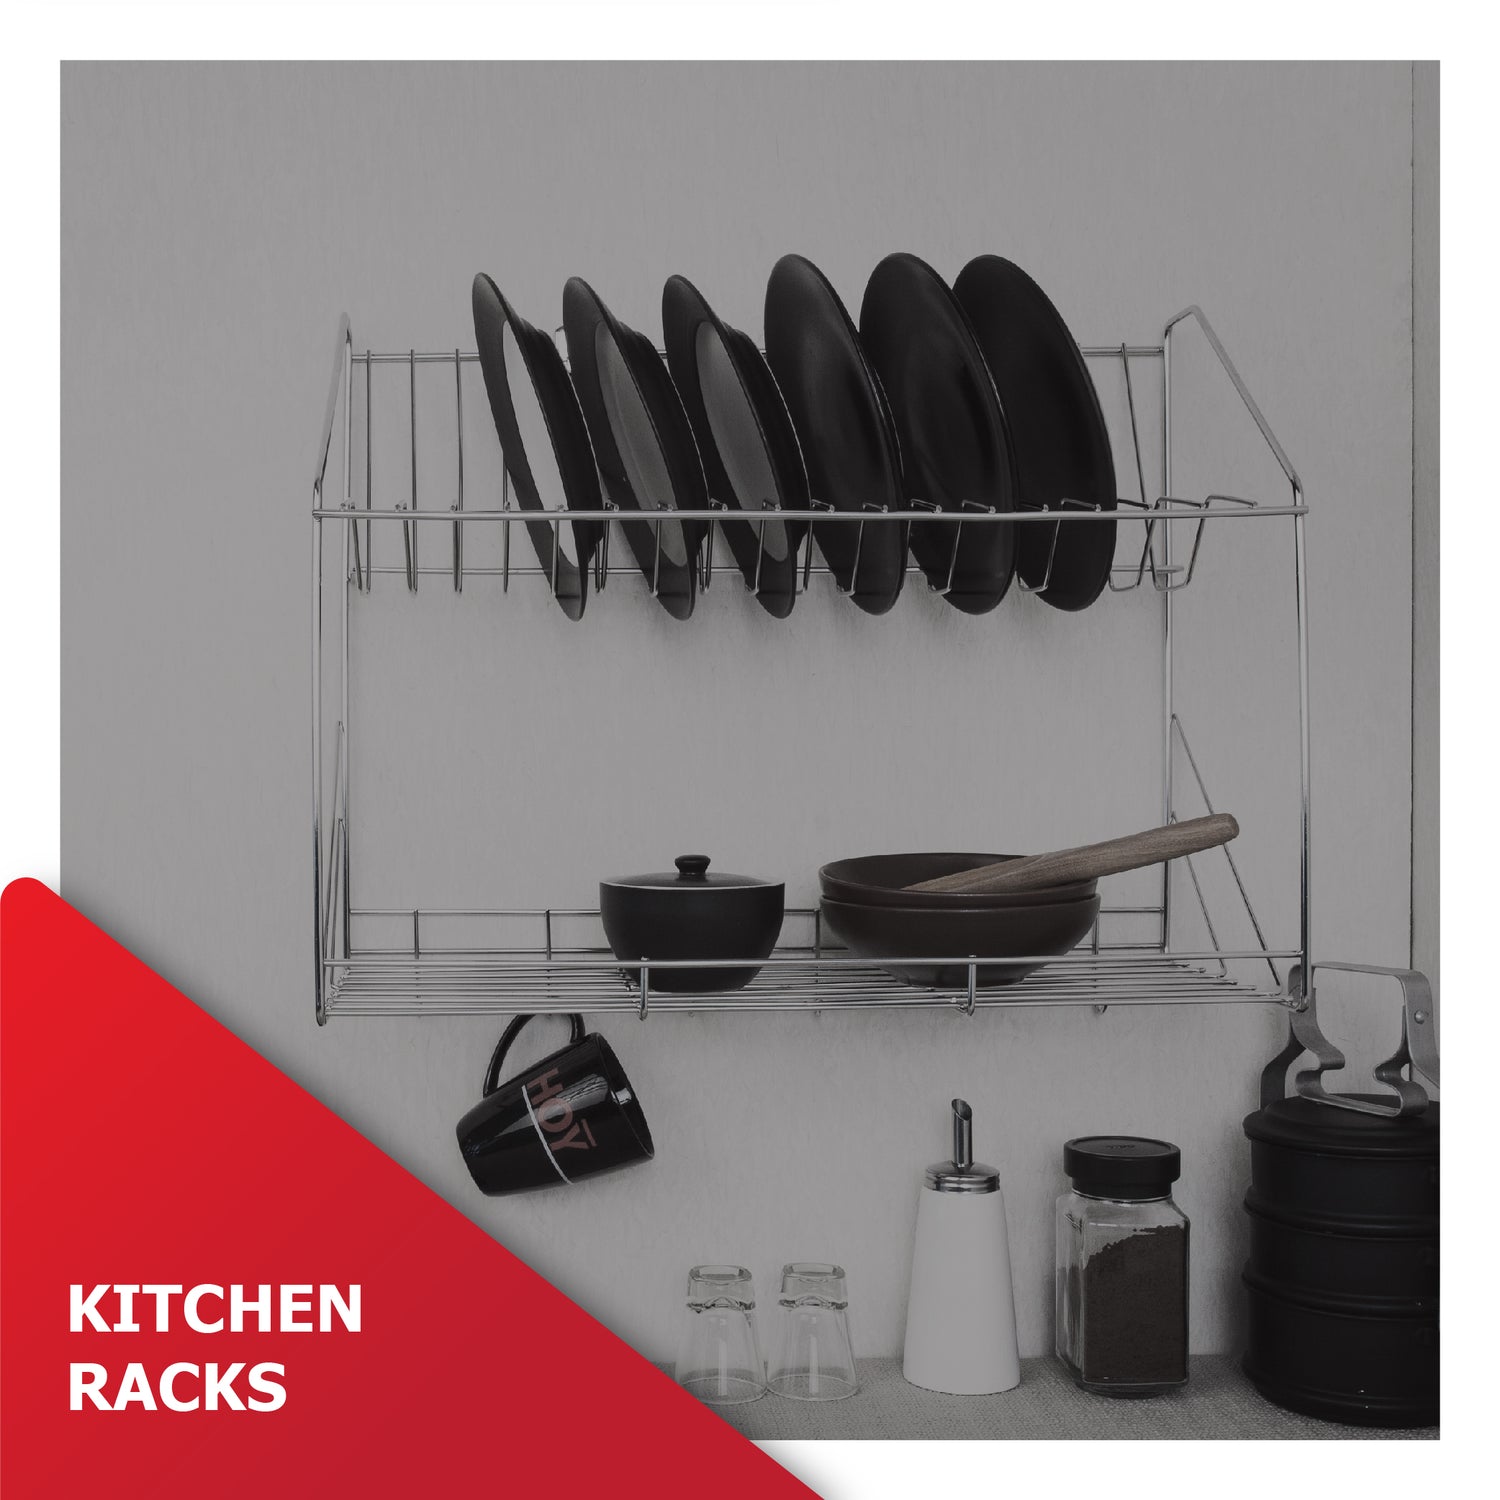 Premium kitchen racks by M. M. Noorbhoy & Co - Durable and stylish storage solutions for a well-organized kitchen.